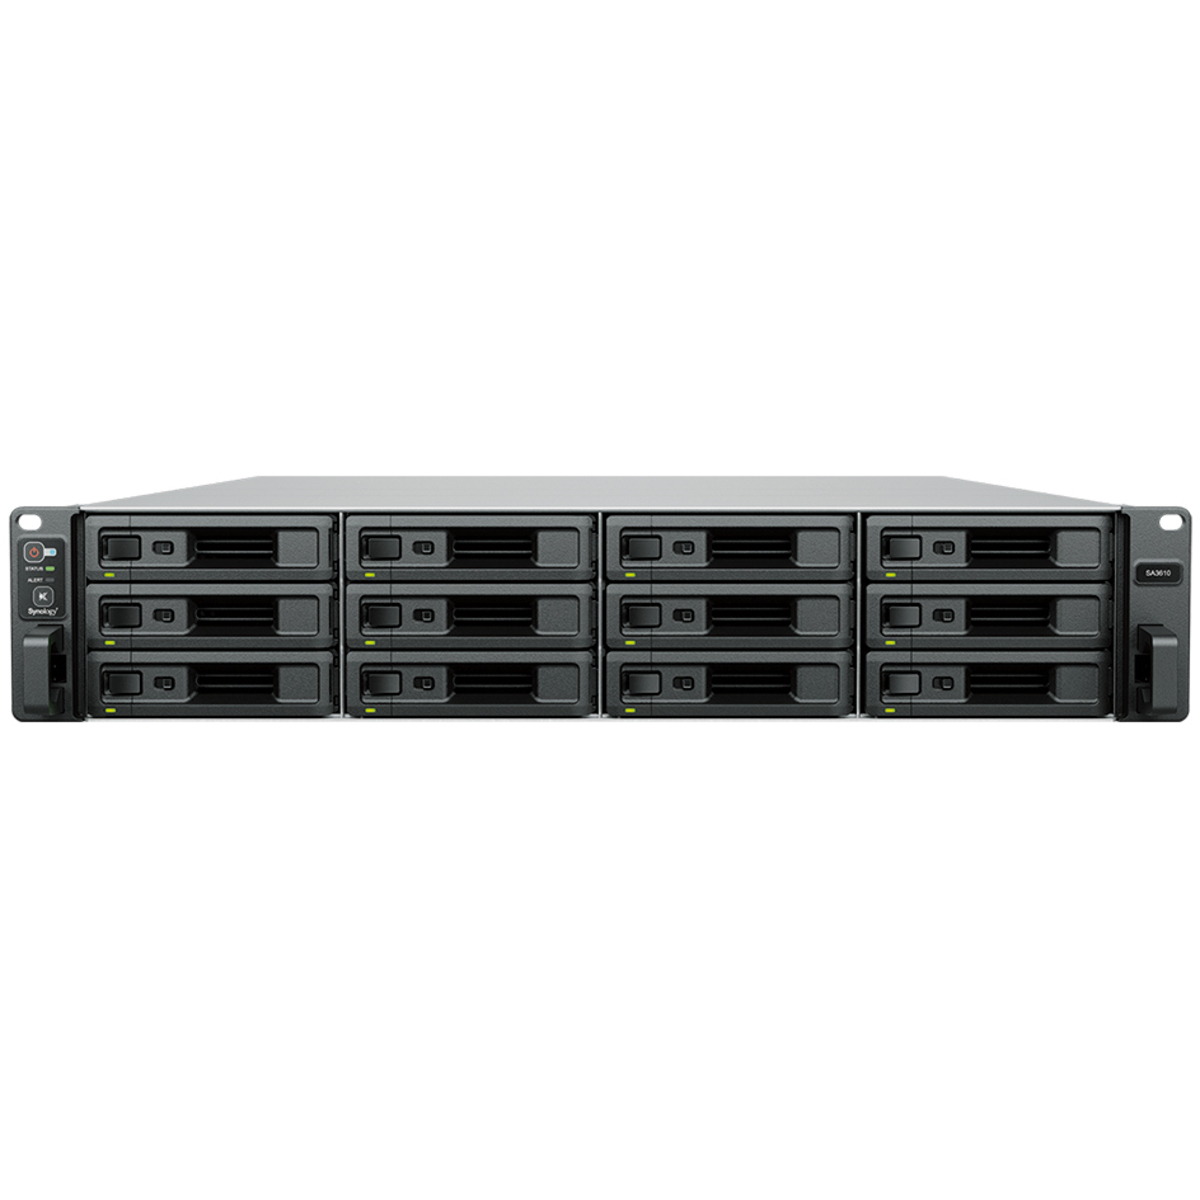 Synology RackStation SA3410 120tb 12-Bay RackMount Large Business / Enterprise NAS - Network Attached Storage Device 12x10tb Western Digital Red Plus WD101EFBX 3.5 7200rpm SATA 6Gb/s HDD NAS Class Drives Installed - Burn-In Tested RackStation SA3410